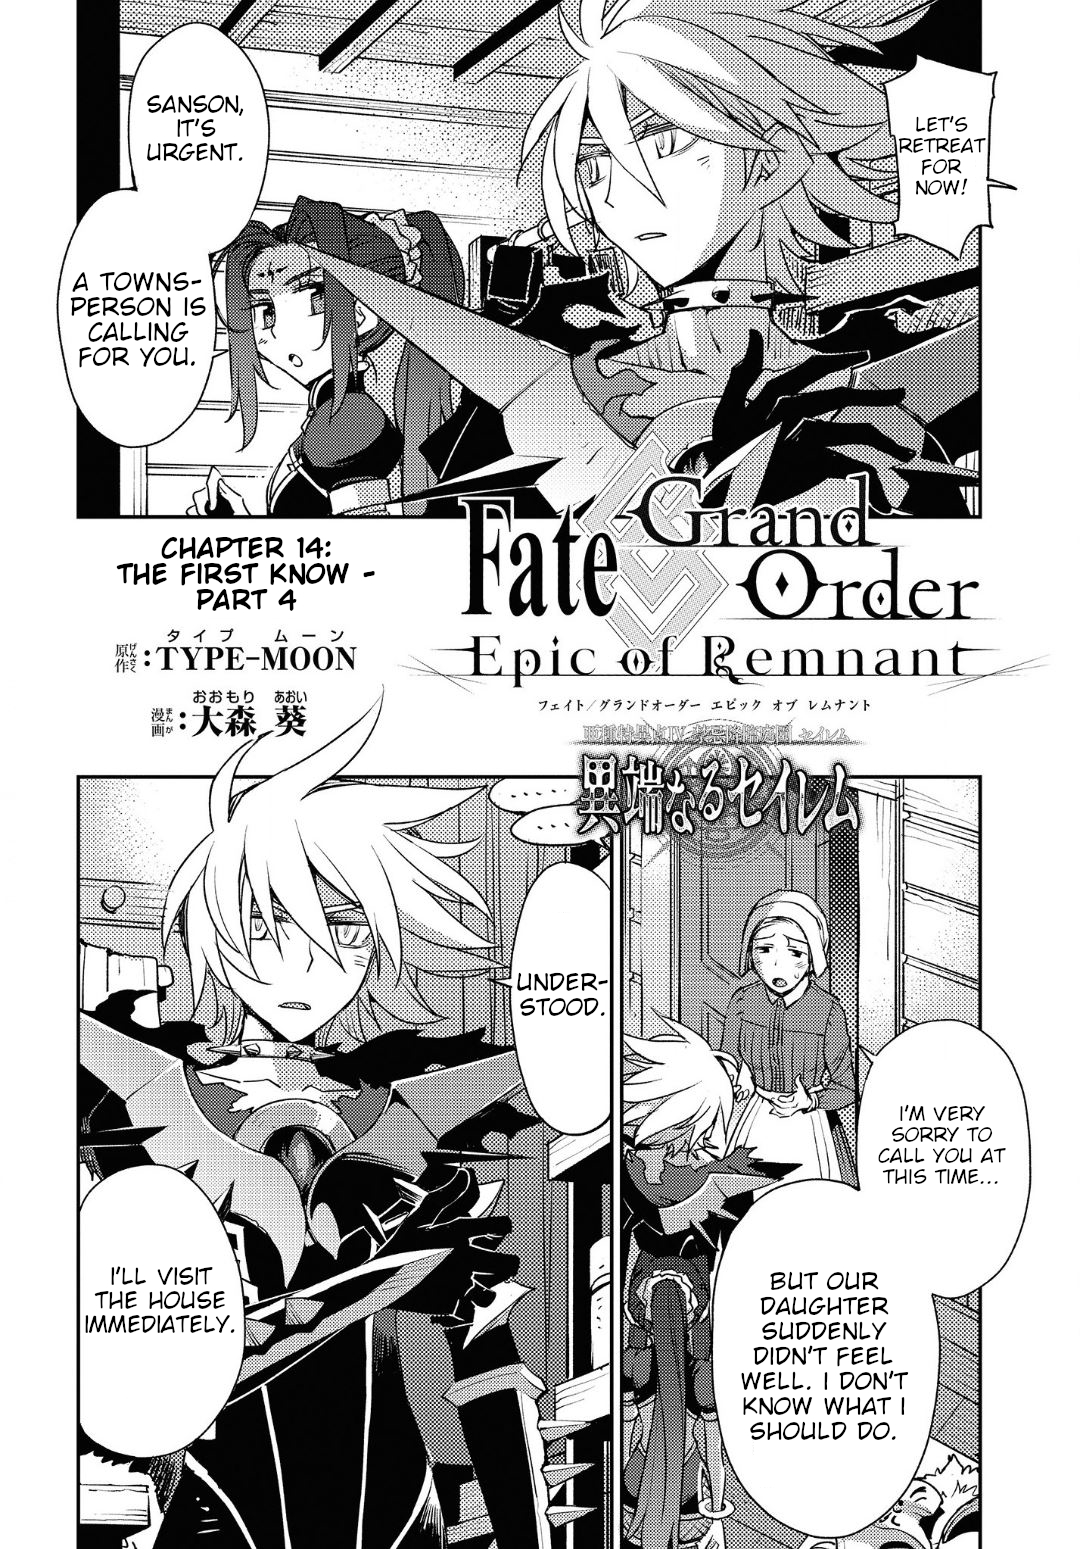 Fate/grand Order: Epic Of Remnant: Pseudo-Singularity Iv: The Forbidden Advent Garden, Salem - Heretical Salem Chapter 14: The First Knot - Picture 3